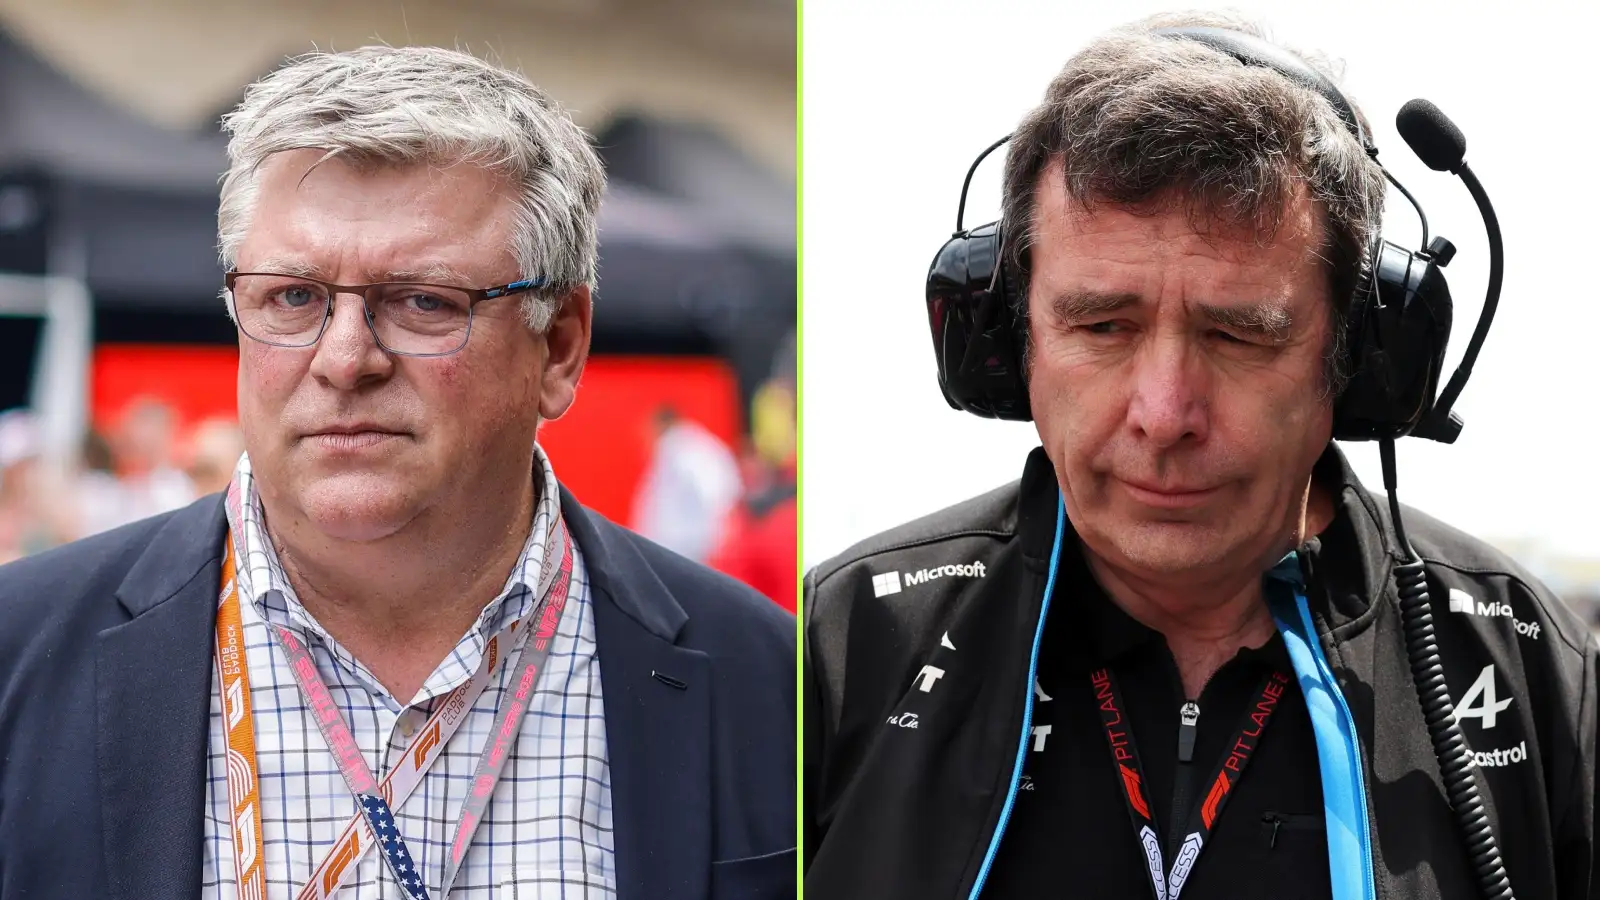 Otmar Szafnauer hits back at Alpine with doubts raised over Renault’s F1 ability